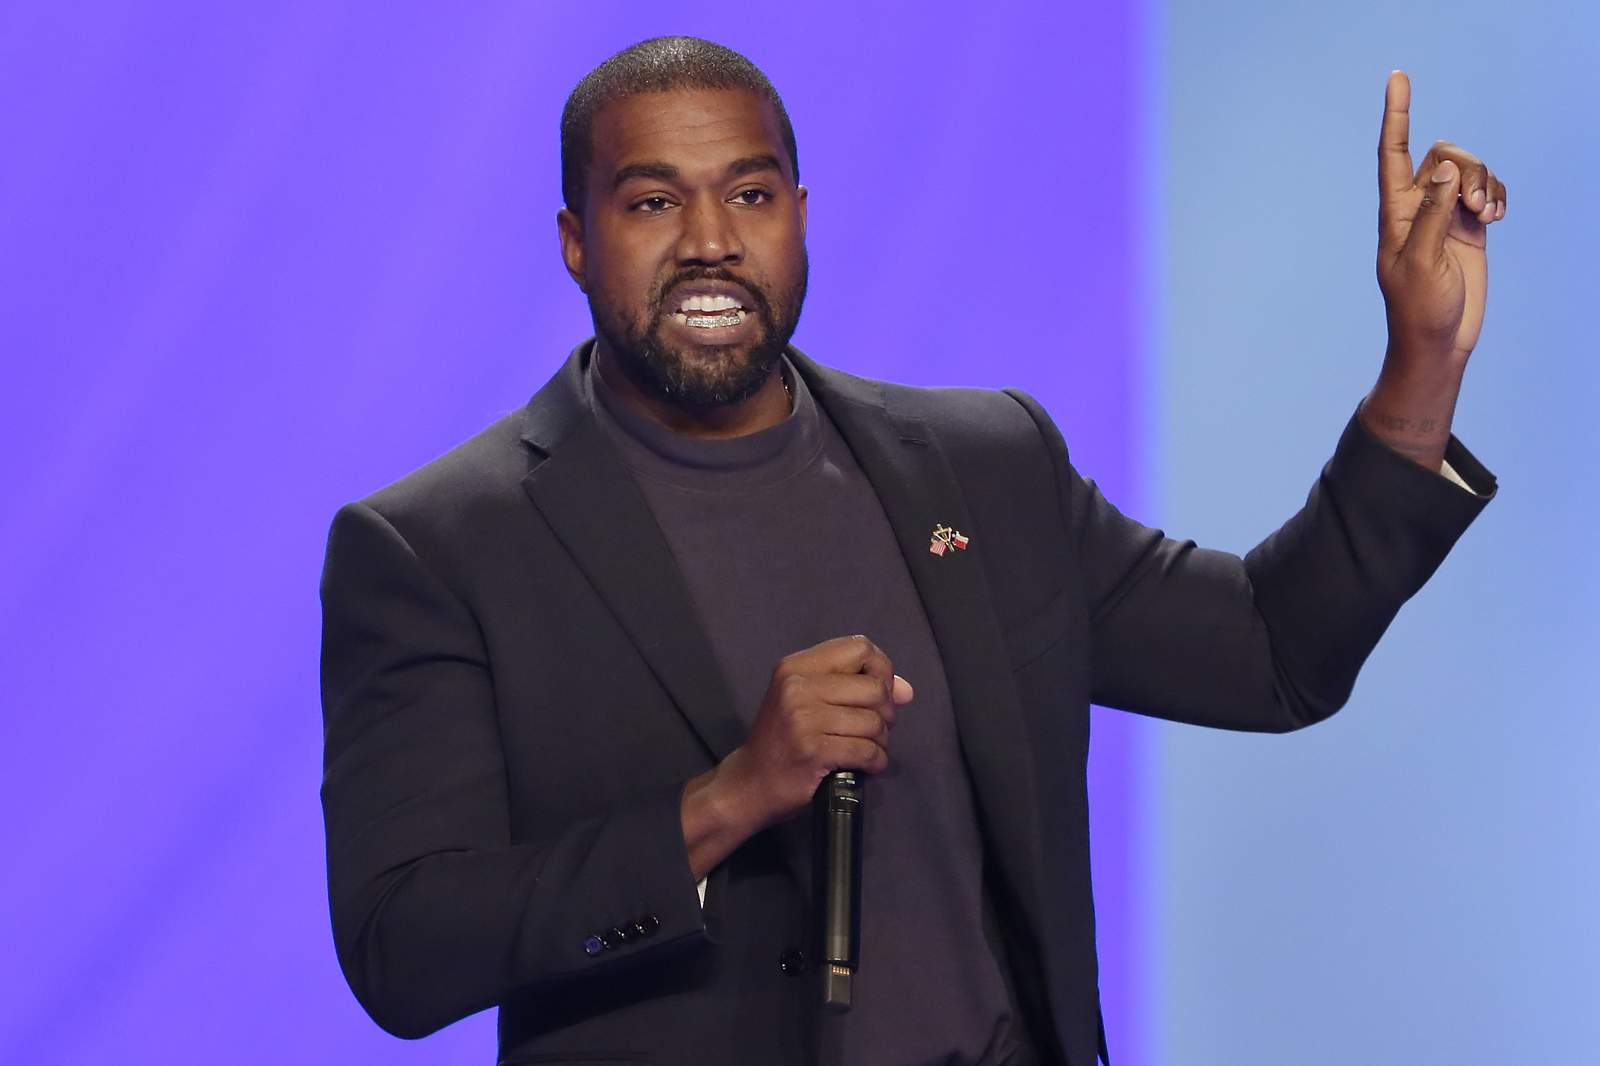 Yes, Kanye West is really on the ballot for president in Virginia